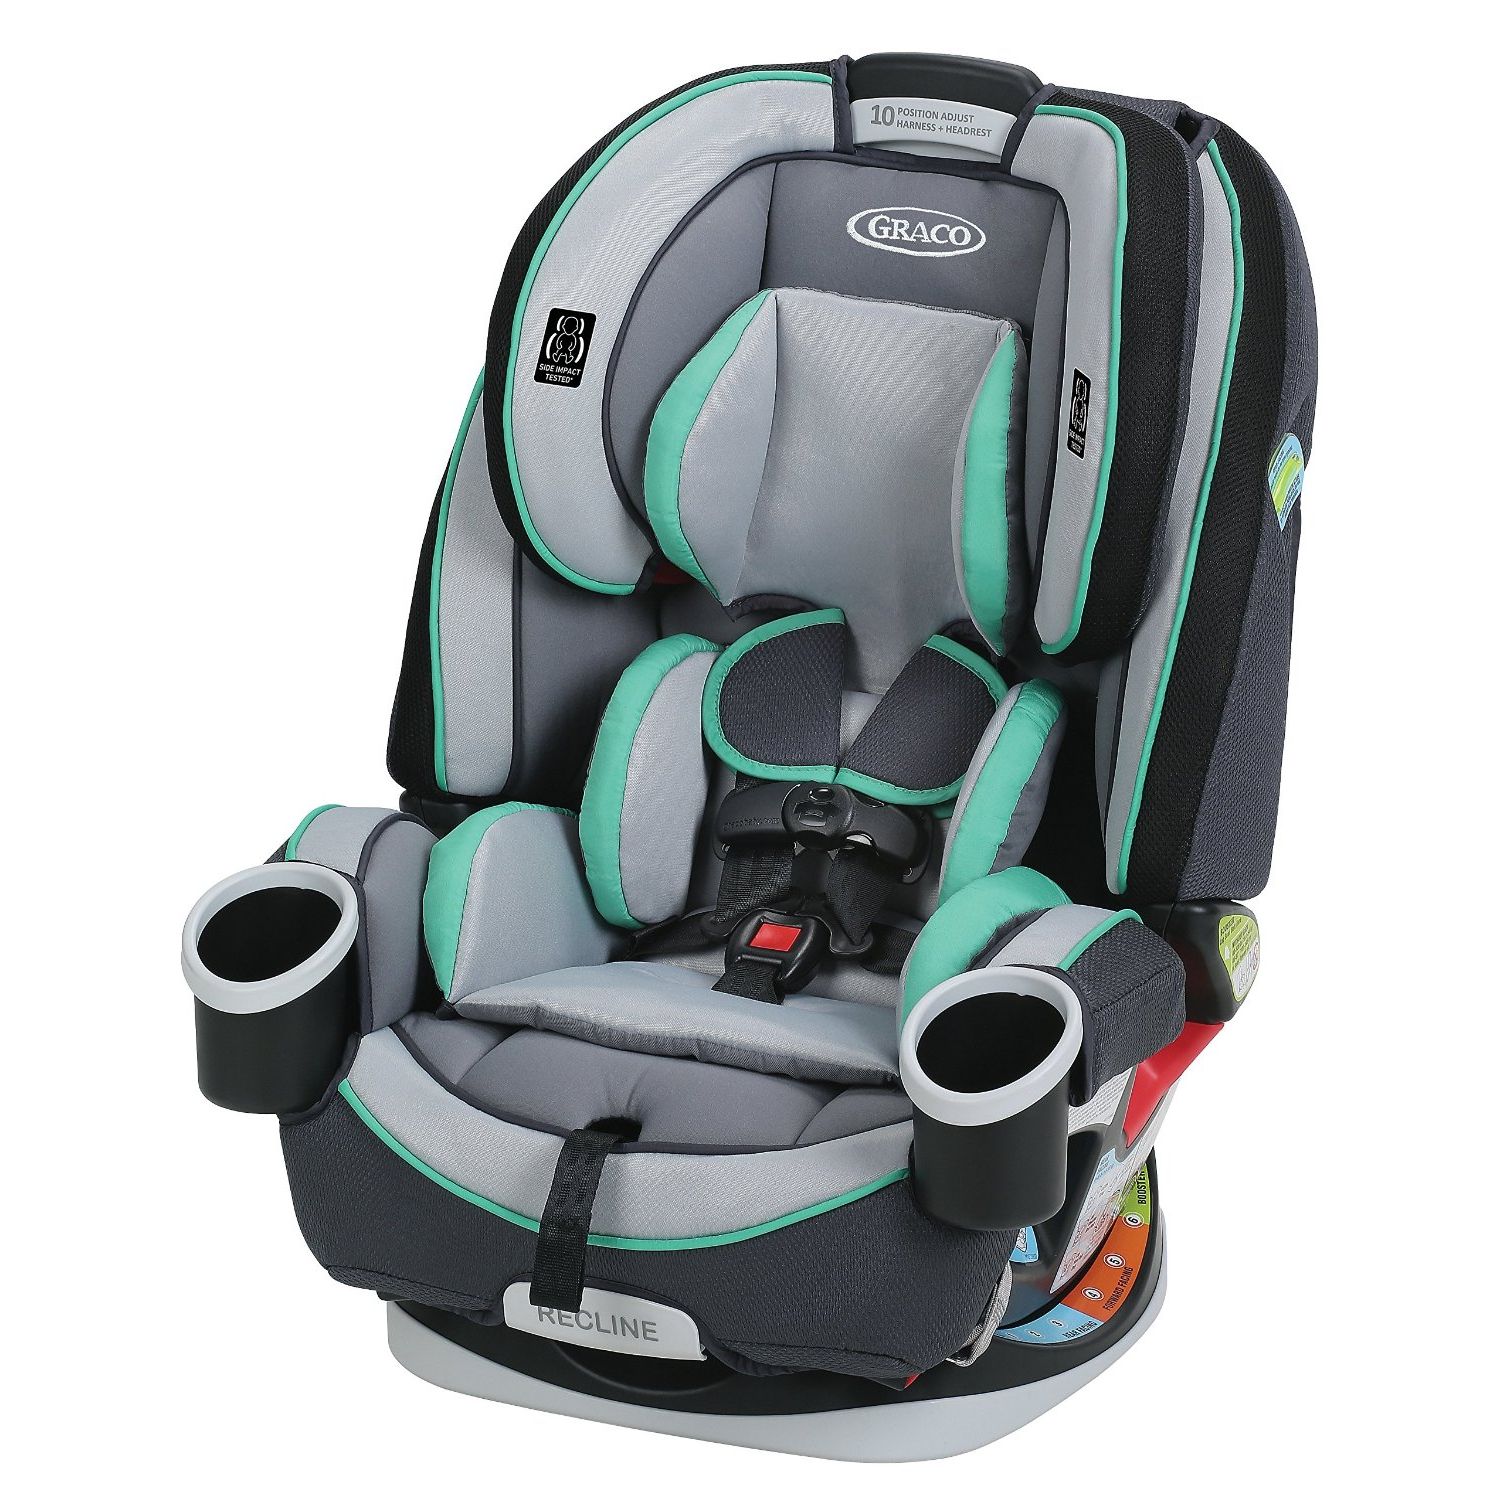 Shop Super-Low Prices on Strollers, Car Seats & Essentials During Baby